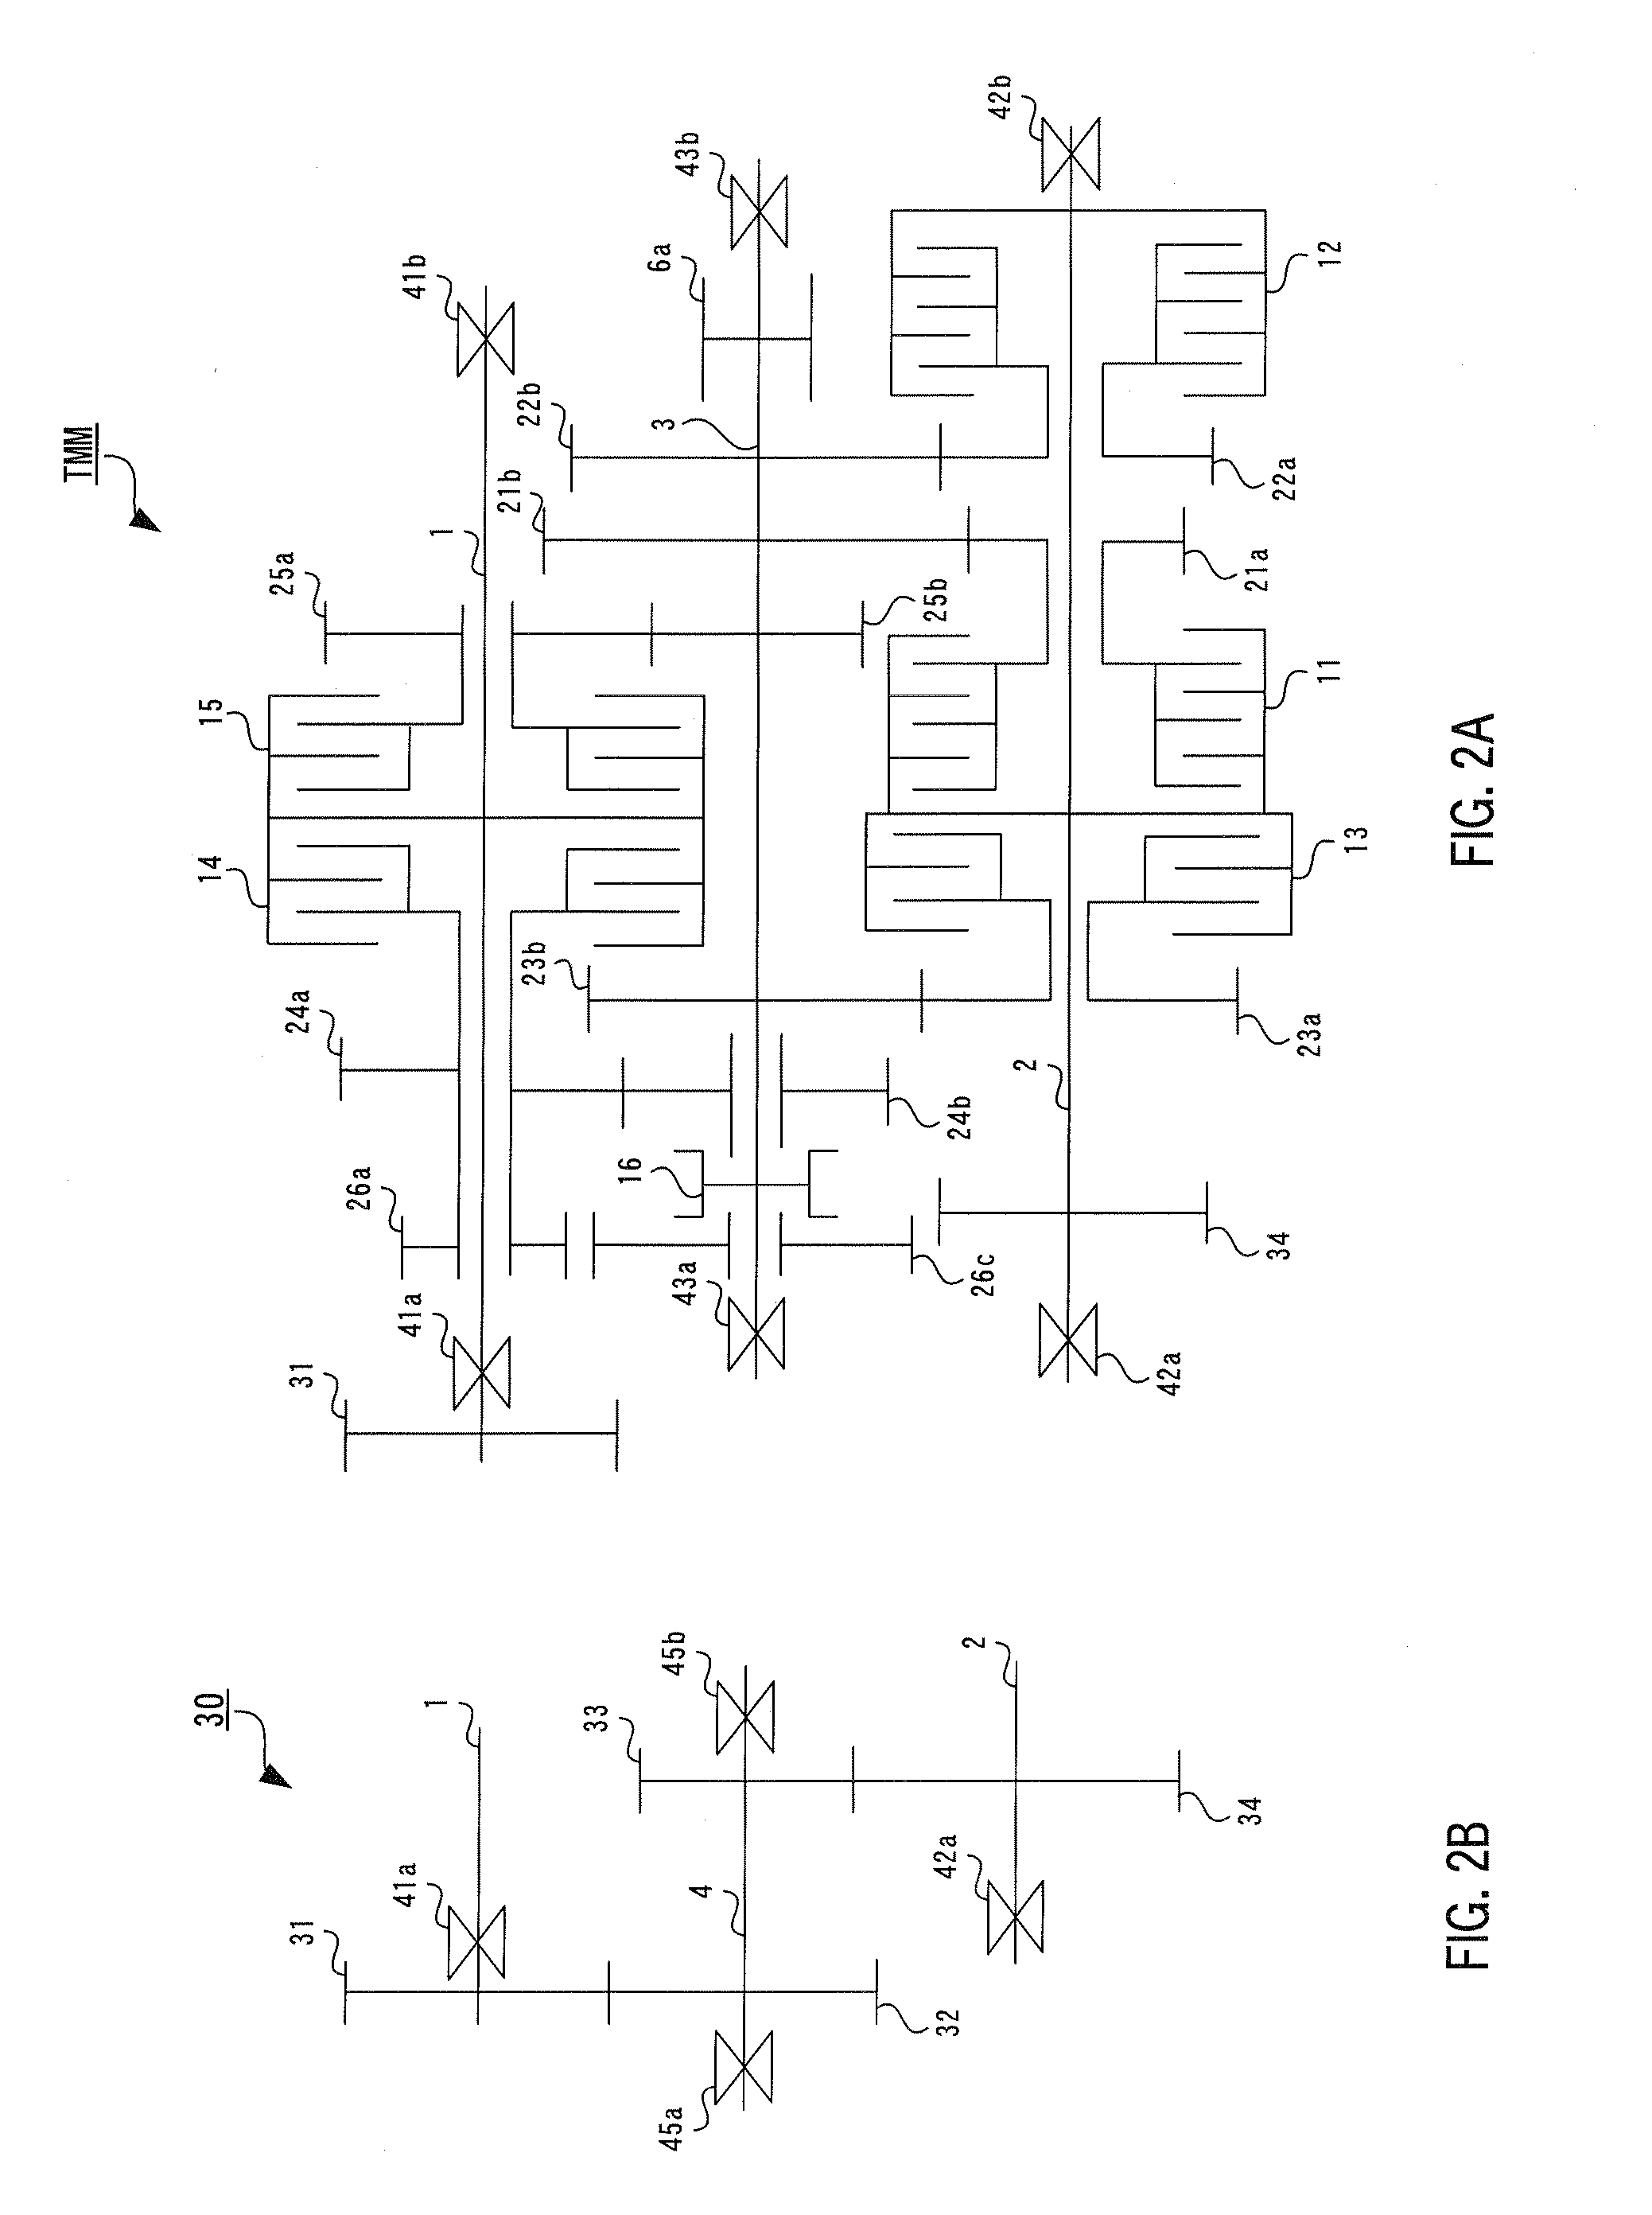 Shift control device for automatic transmission